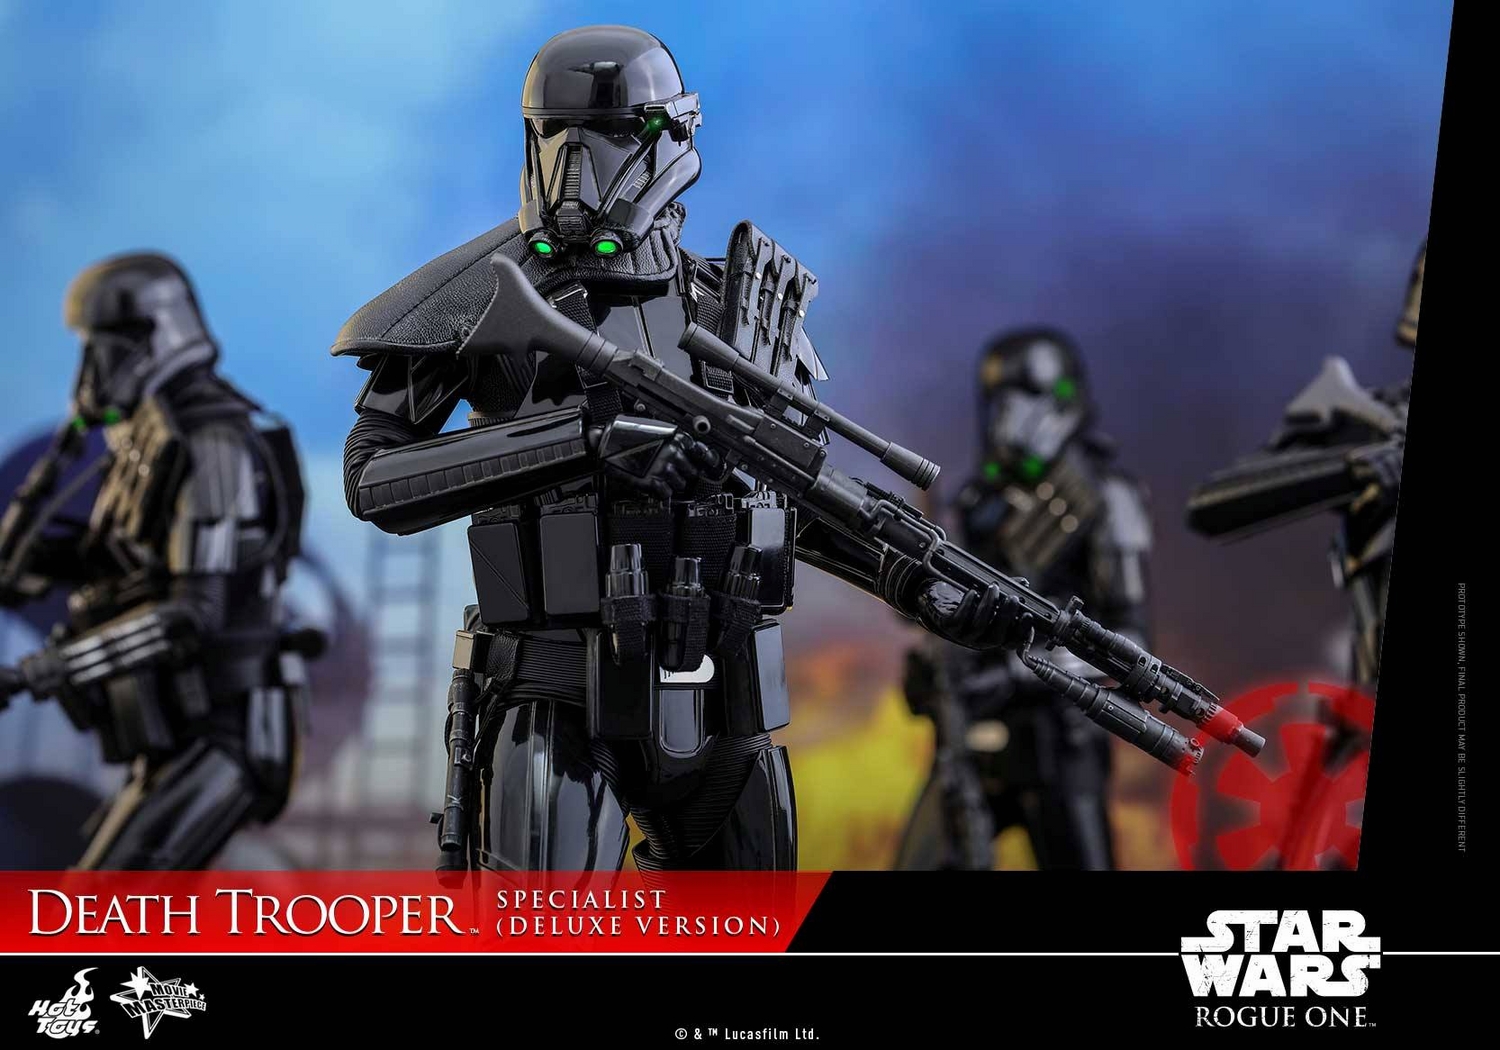 rogue-one-sixth-scale-death-trooper-specialist-deluxe-version-111516-011.jpg